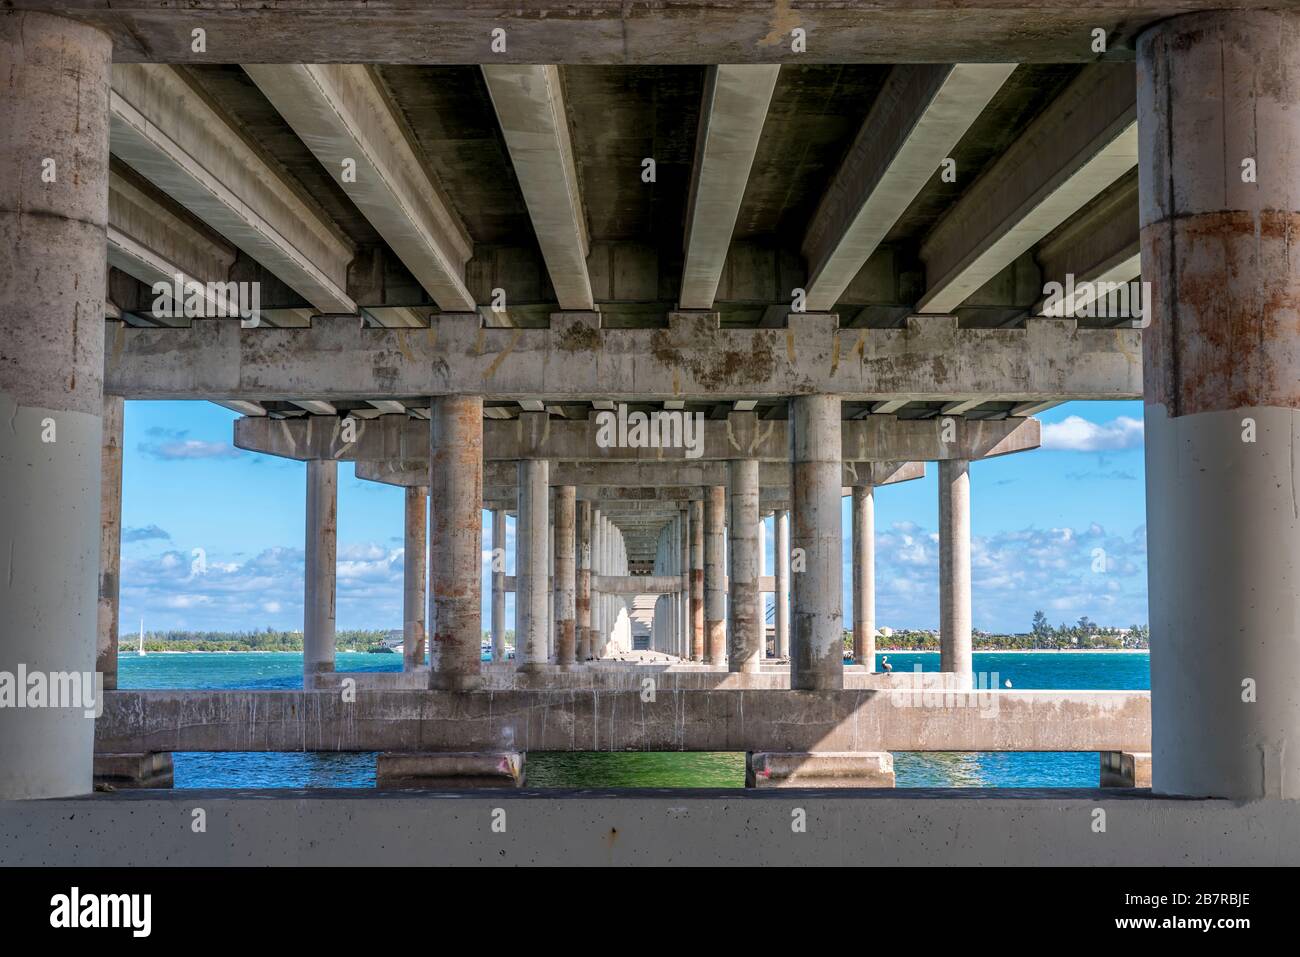 A view from underneath a concrete bridge in Florida Stock Photo